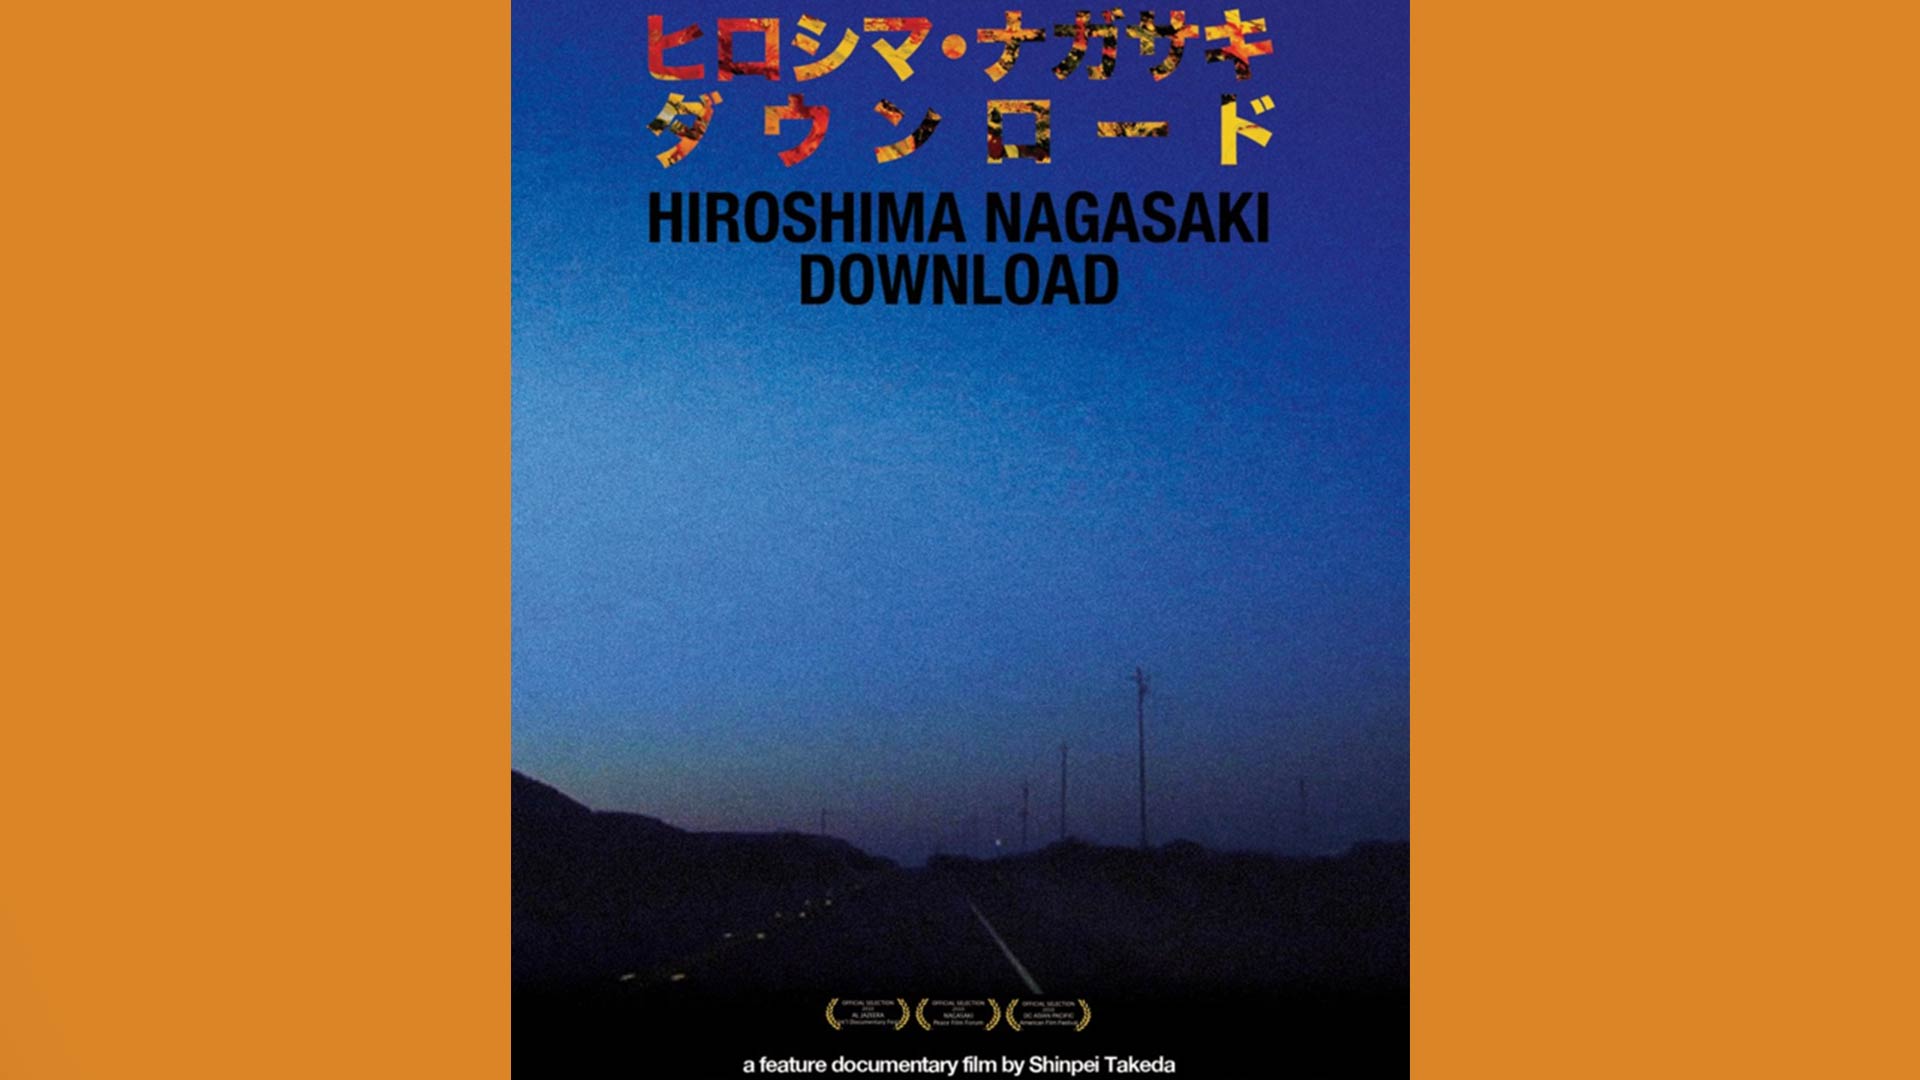 movie poster for Hiroshima Nagasaki Download showing a blue night sky and a empty highway